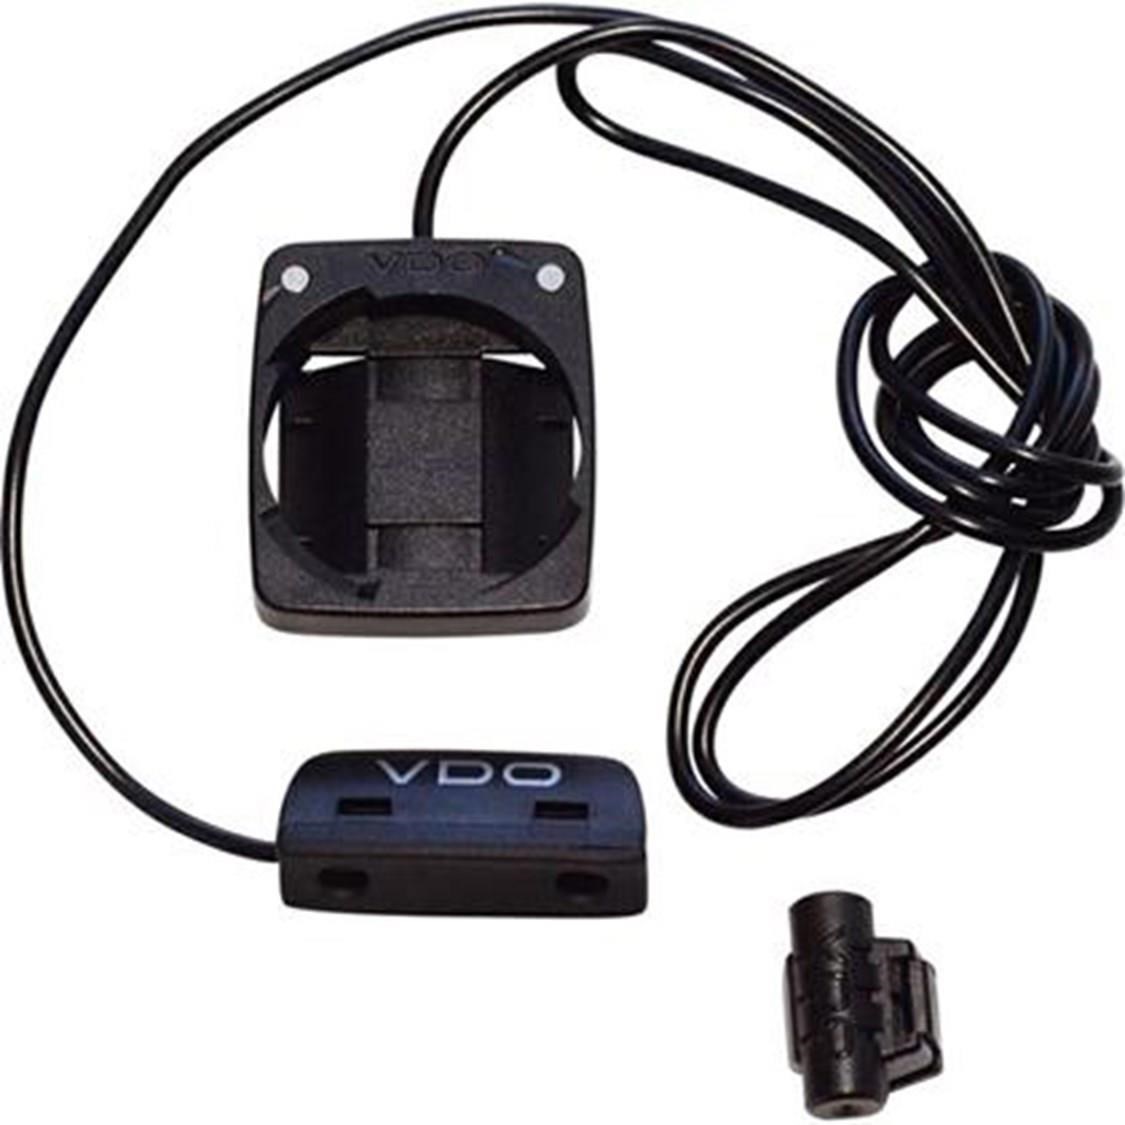 VDO M-Series 2nd Bike Kit for Wired M-Series Model(M1-4) product image